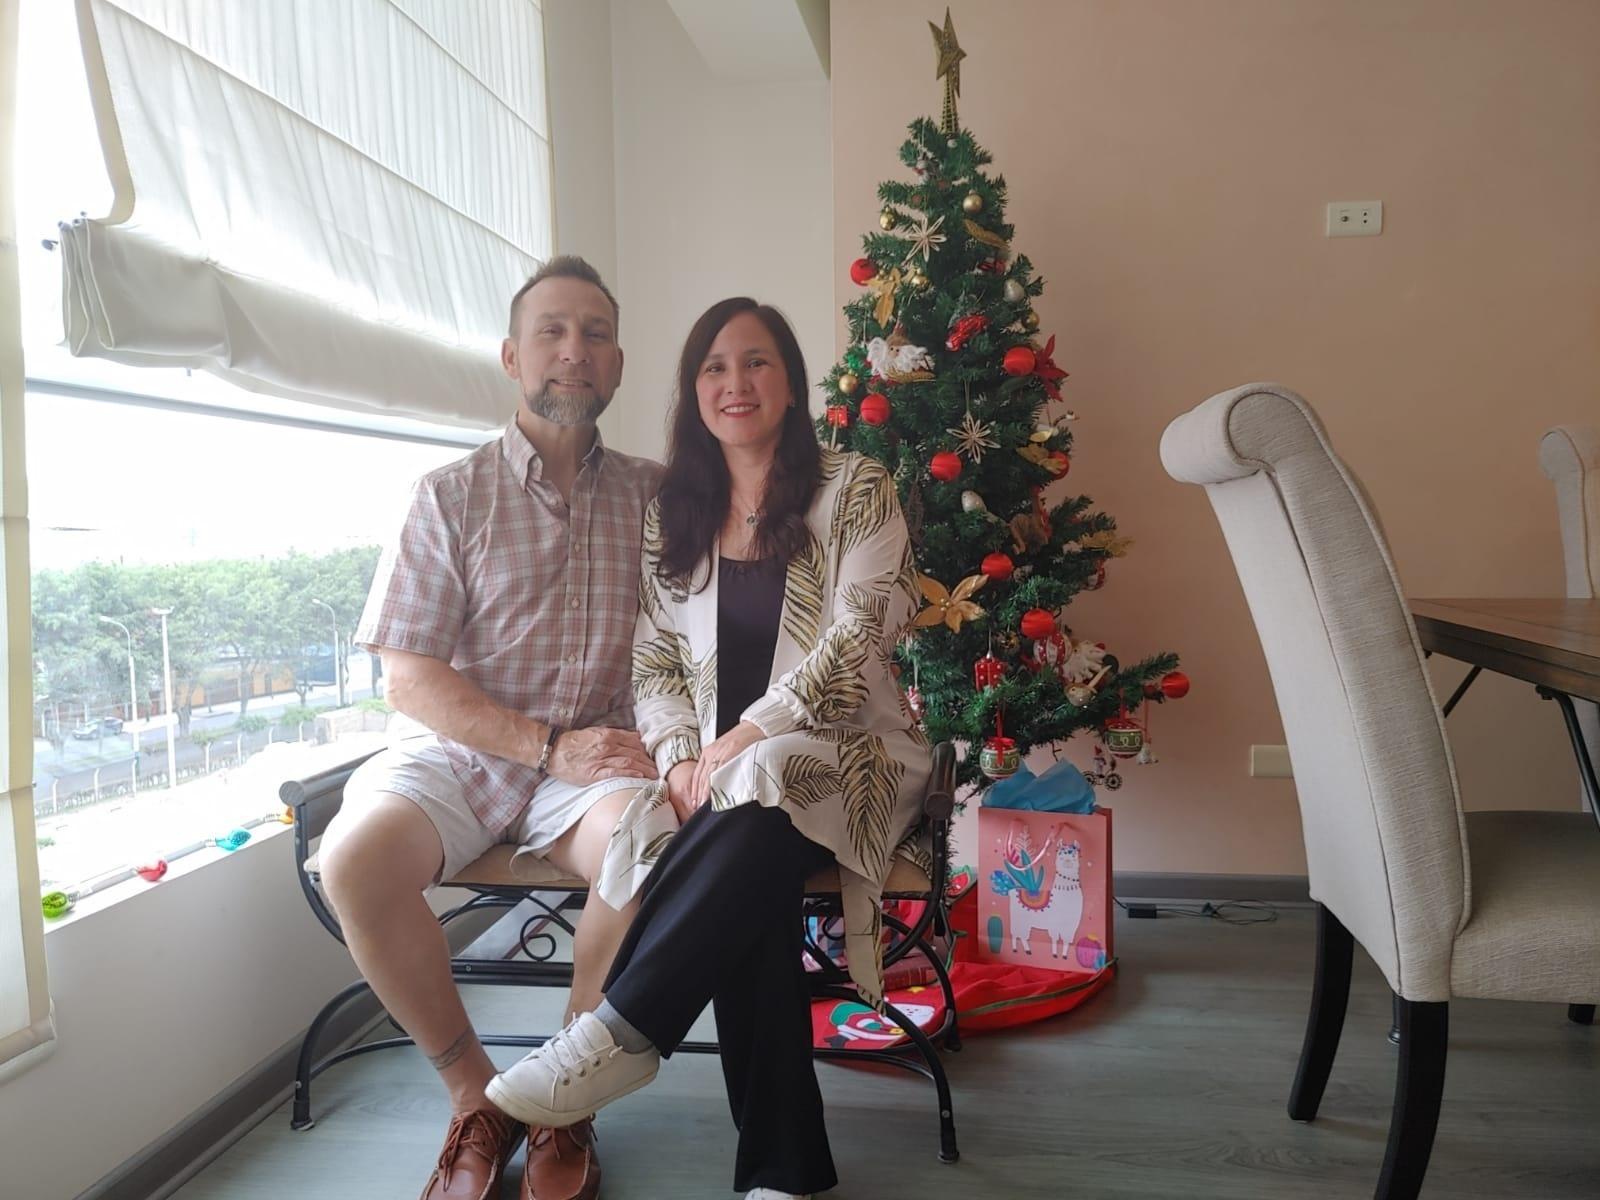 A mixed Christian couple hold hands while sitting in front of a Christmas tree